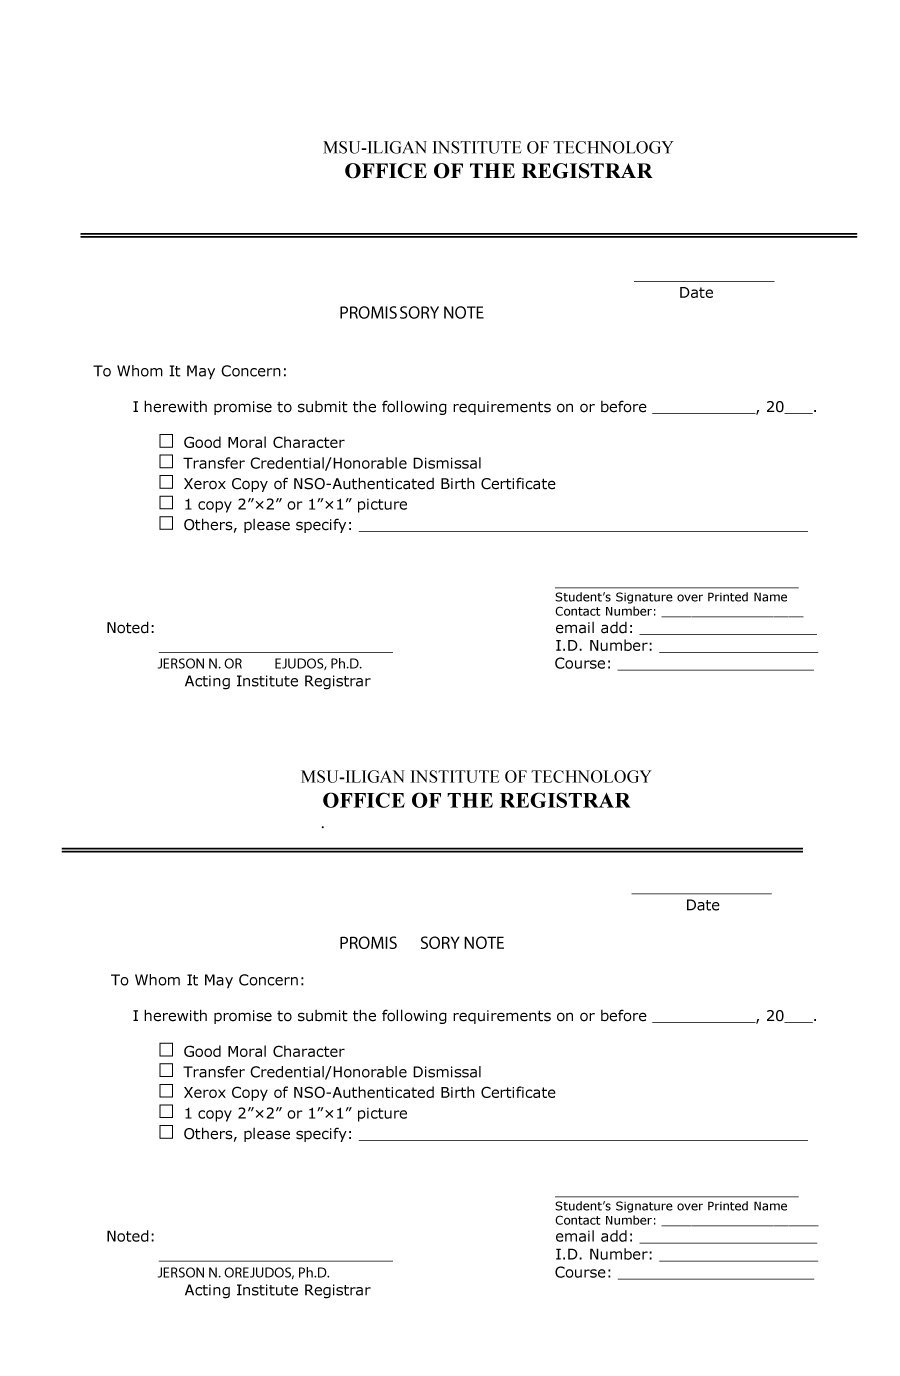 45 Free Promissory Note Templates & Forms [Word & Pdf] ᐅ For Loan Promissory Note Template